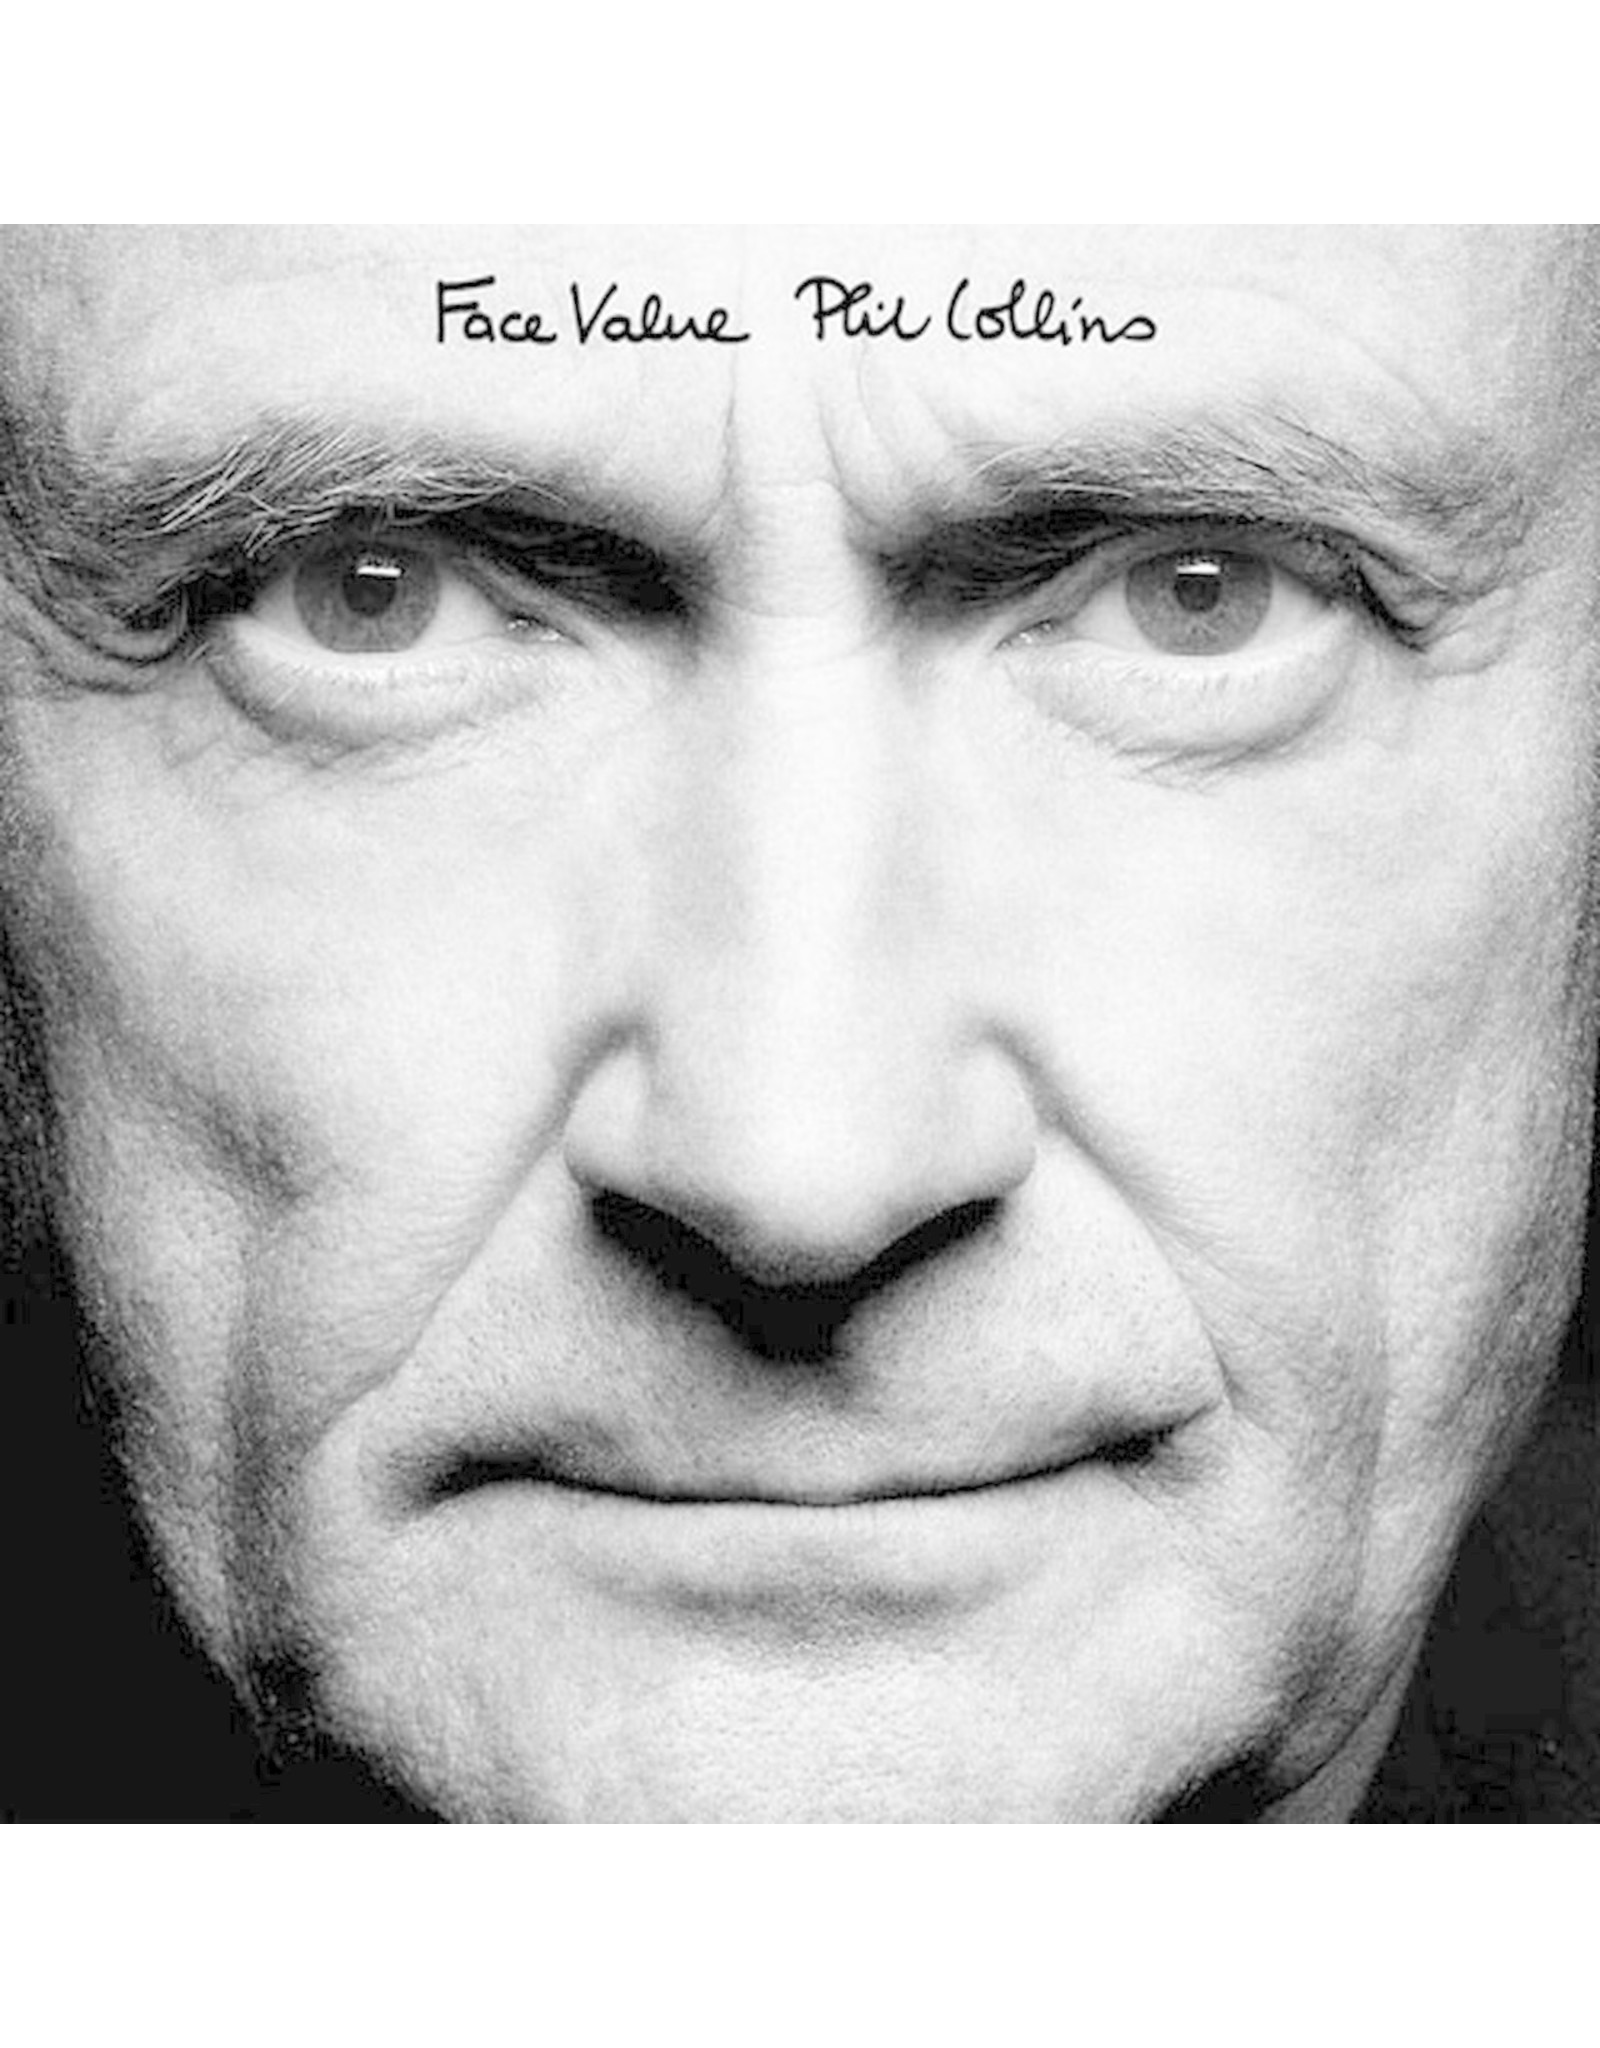 Phil Collins - Face Value (2015 Remaster)